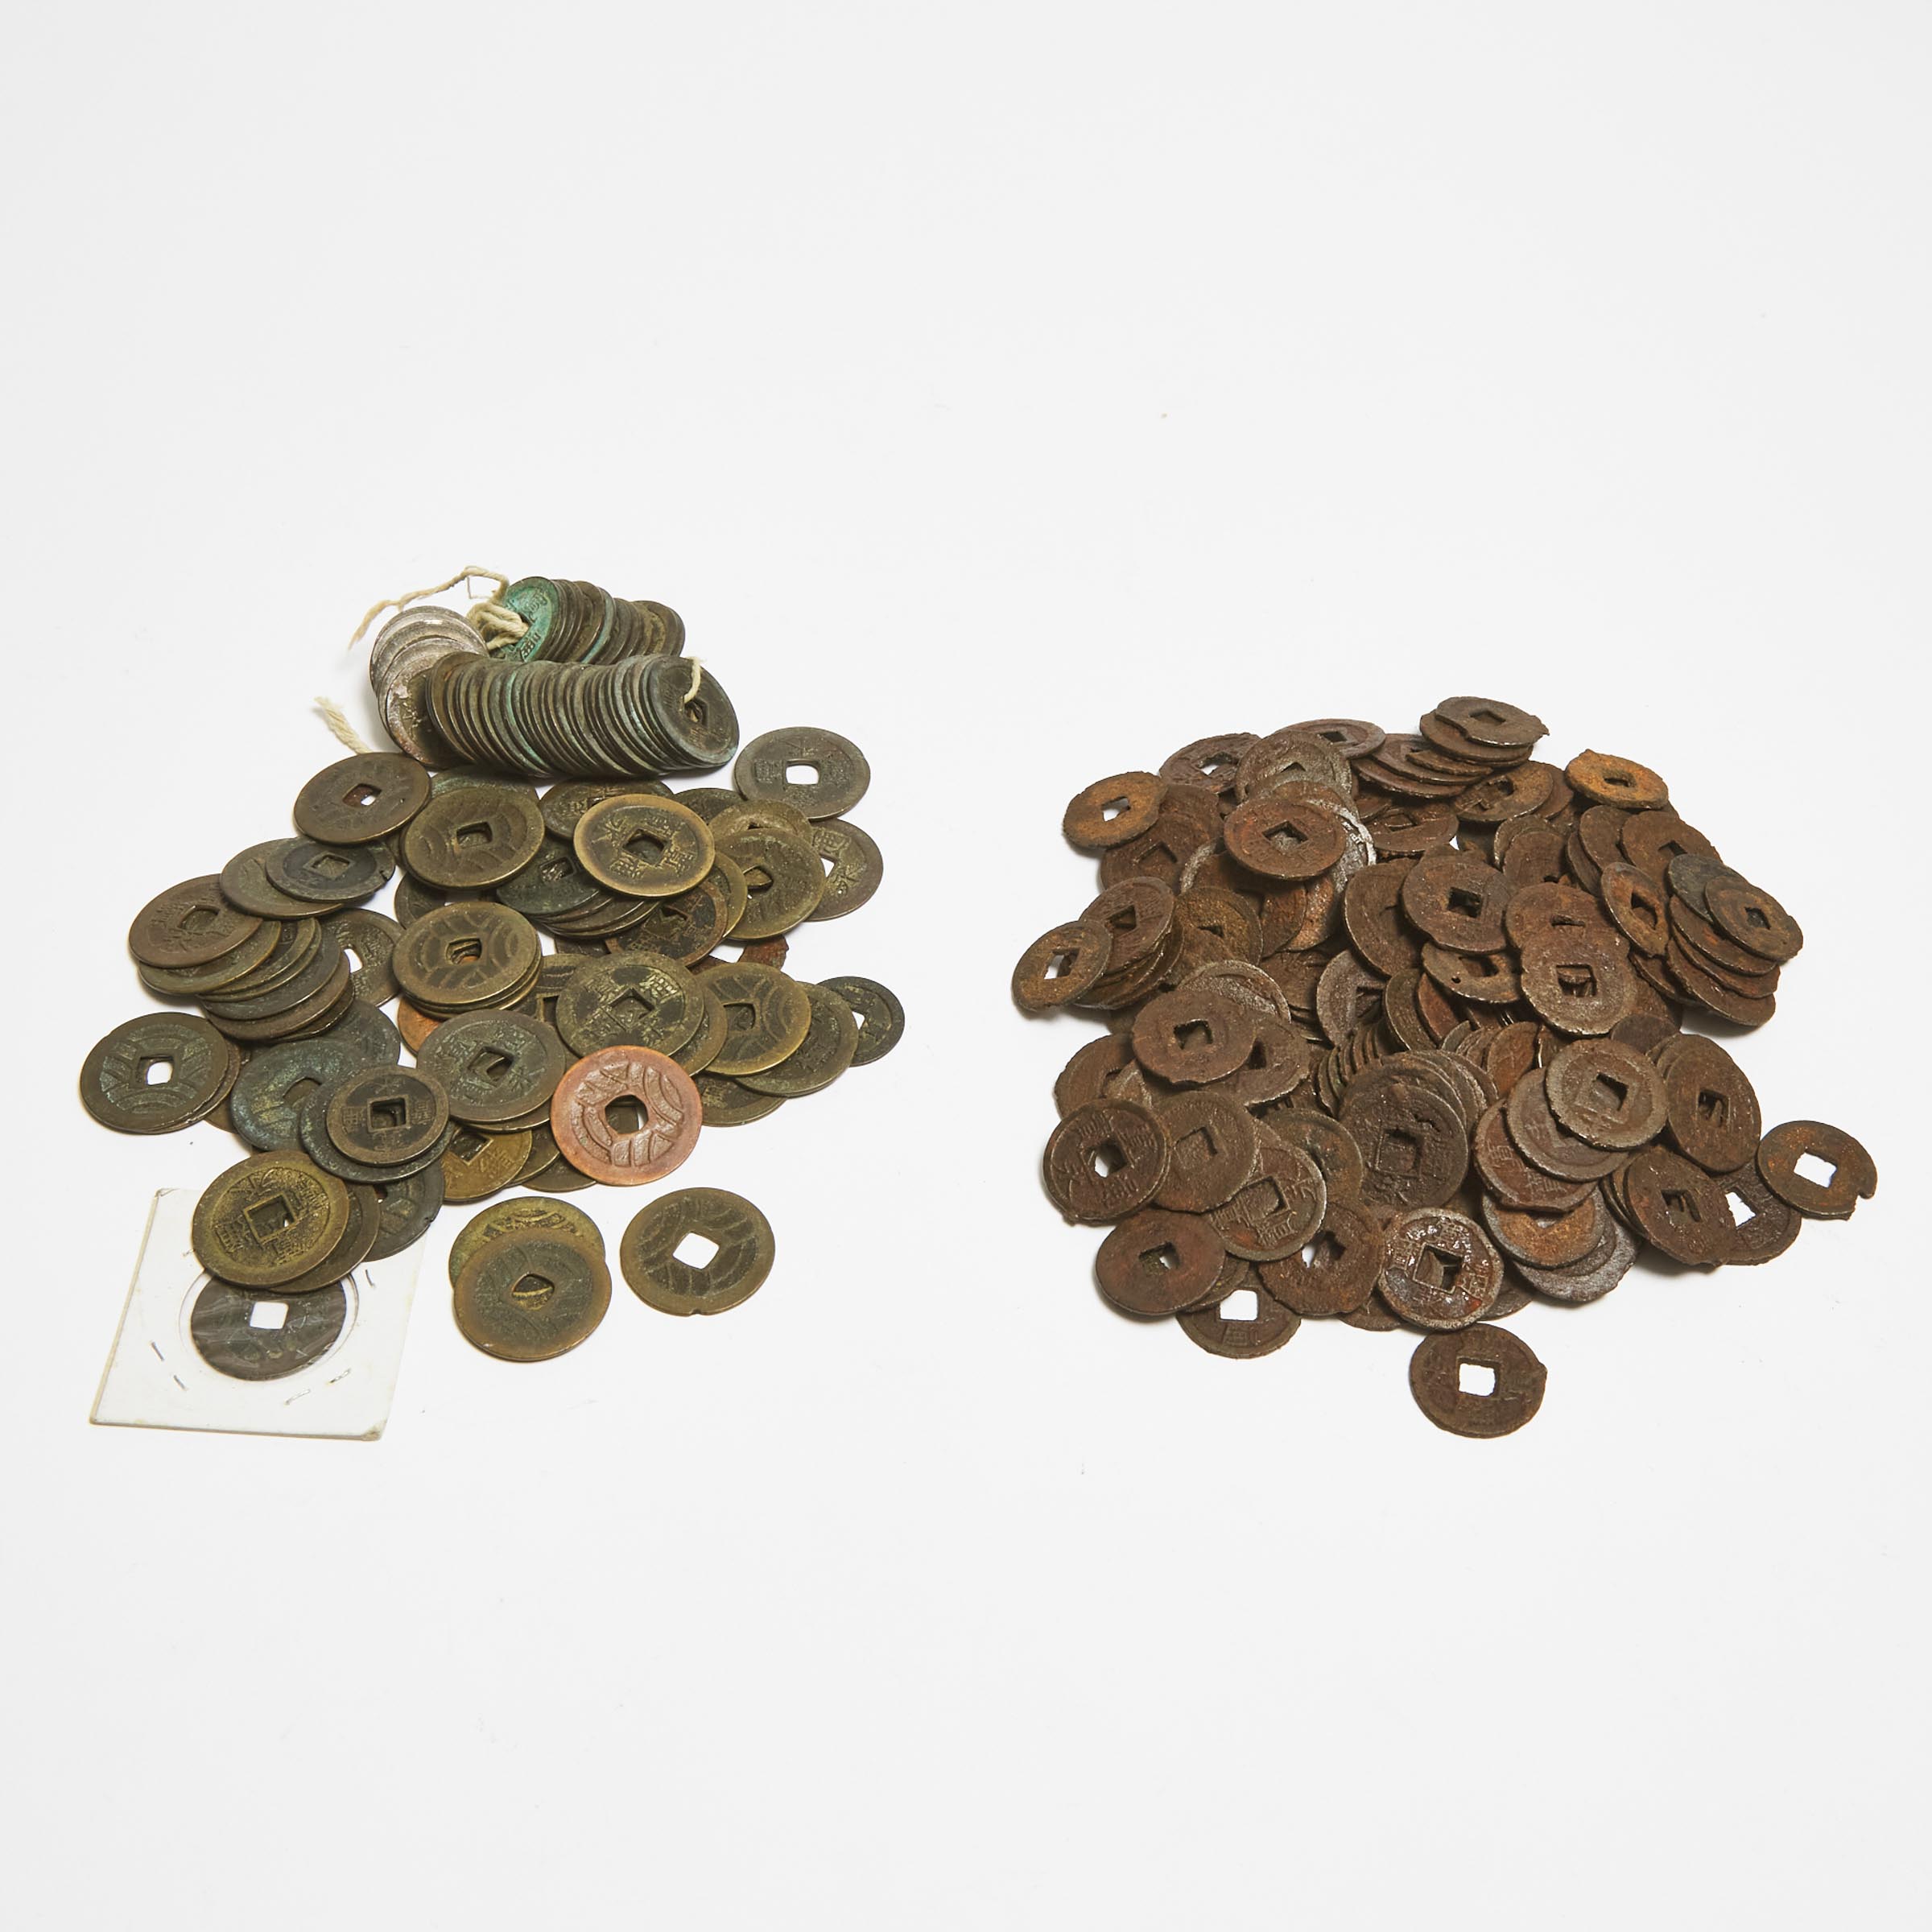 A Group of Two Hundred and Ninety-Five Japanese Coins, Mostly Edo Period